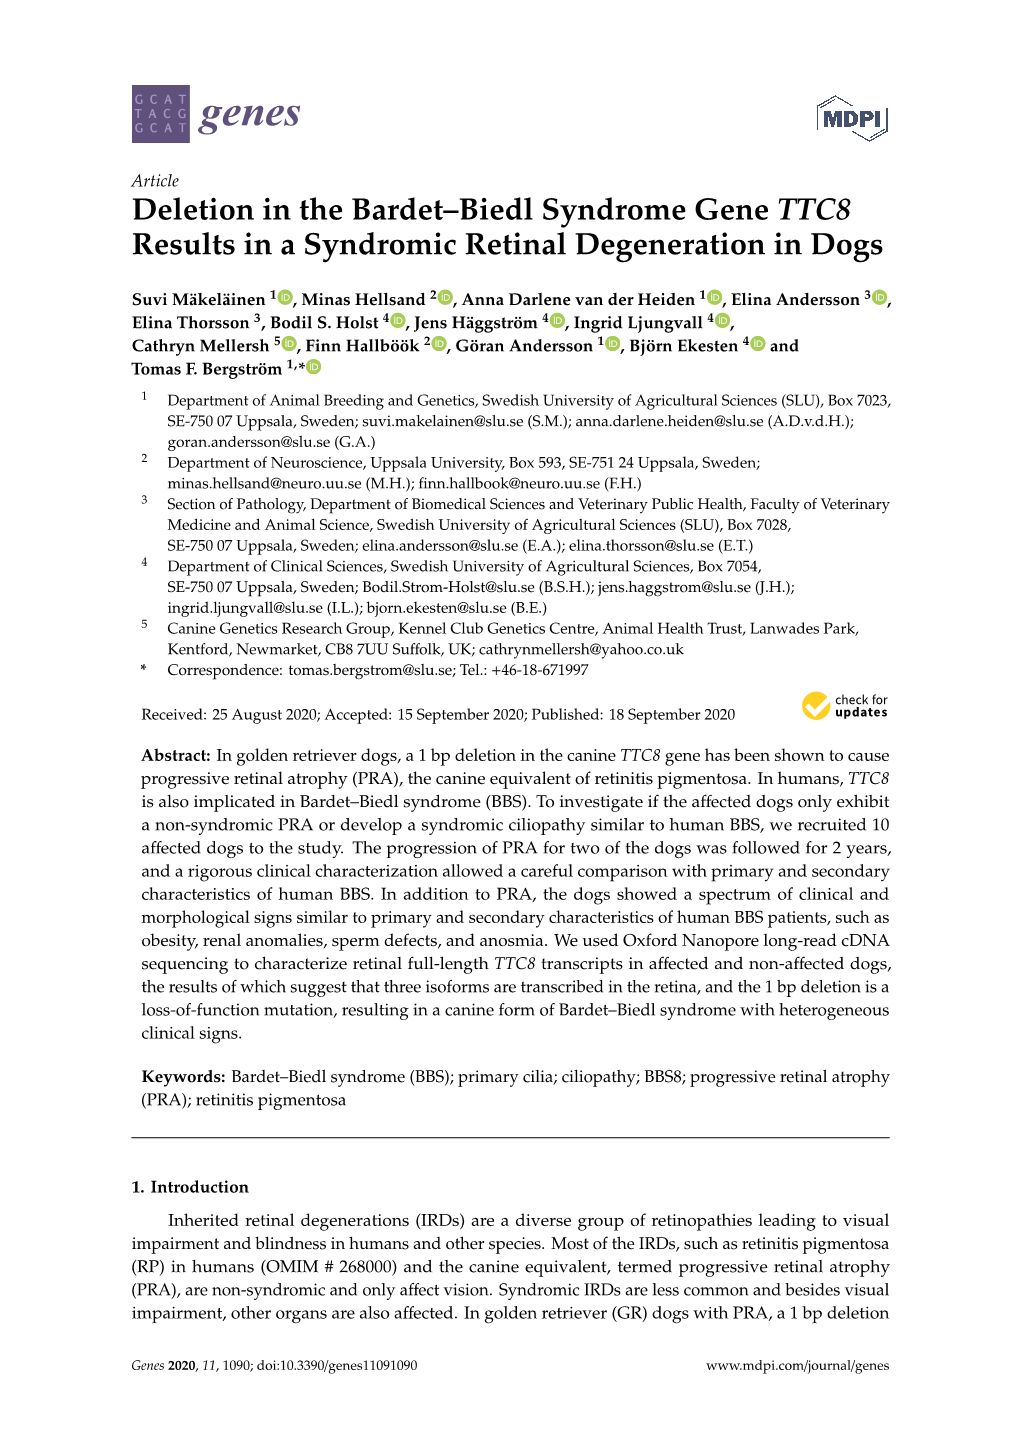 Deletion in the Bardet–Biedl Syndrome Gene TTC8 Results in a Syndromic Retinal Degeneration in Dogs